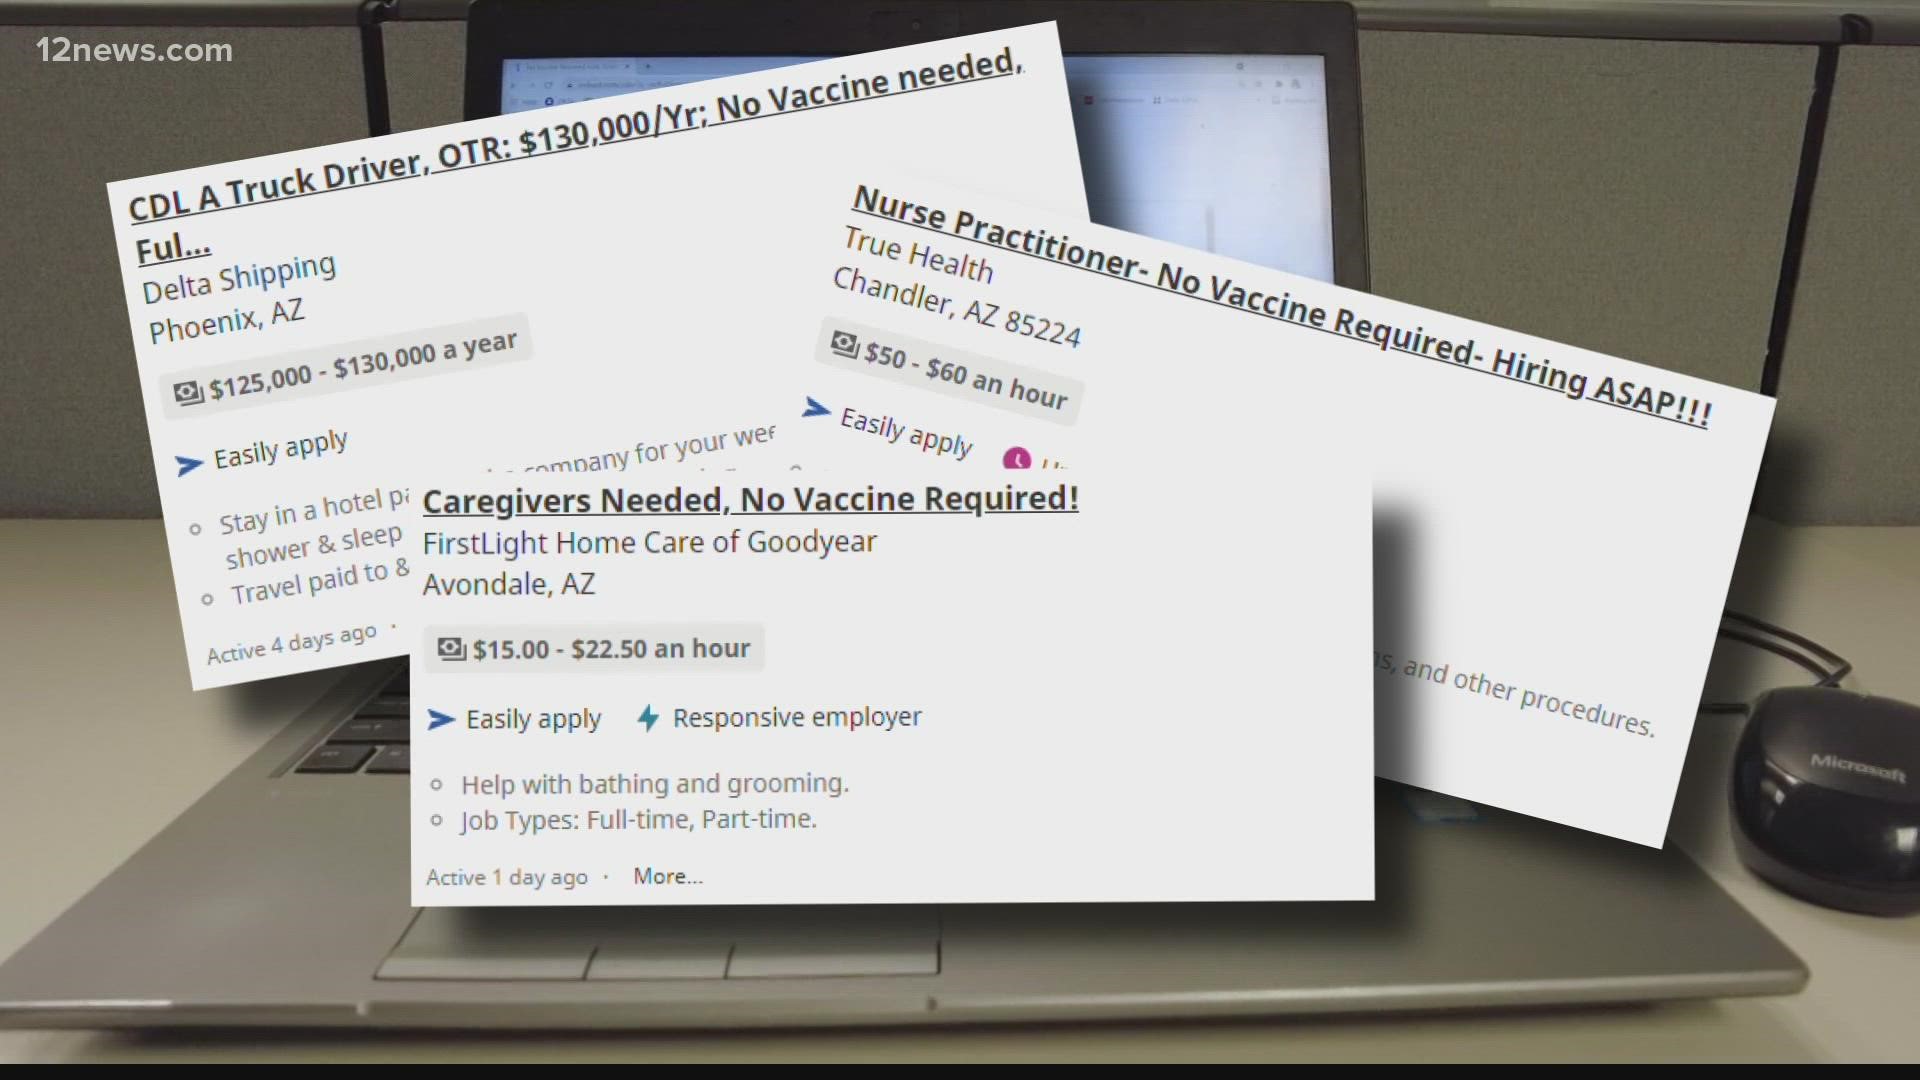 The worker shortage is leading some Valley employers to change their recruiting efforts. They're advertising that applicants don't need the COVID-19 vaccine to work.